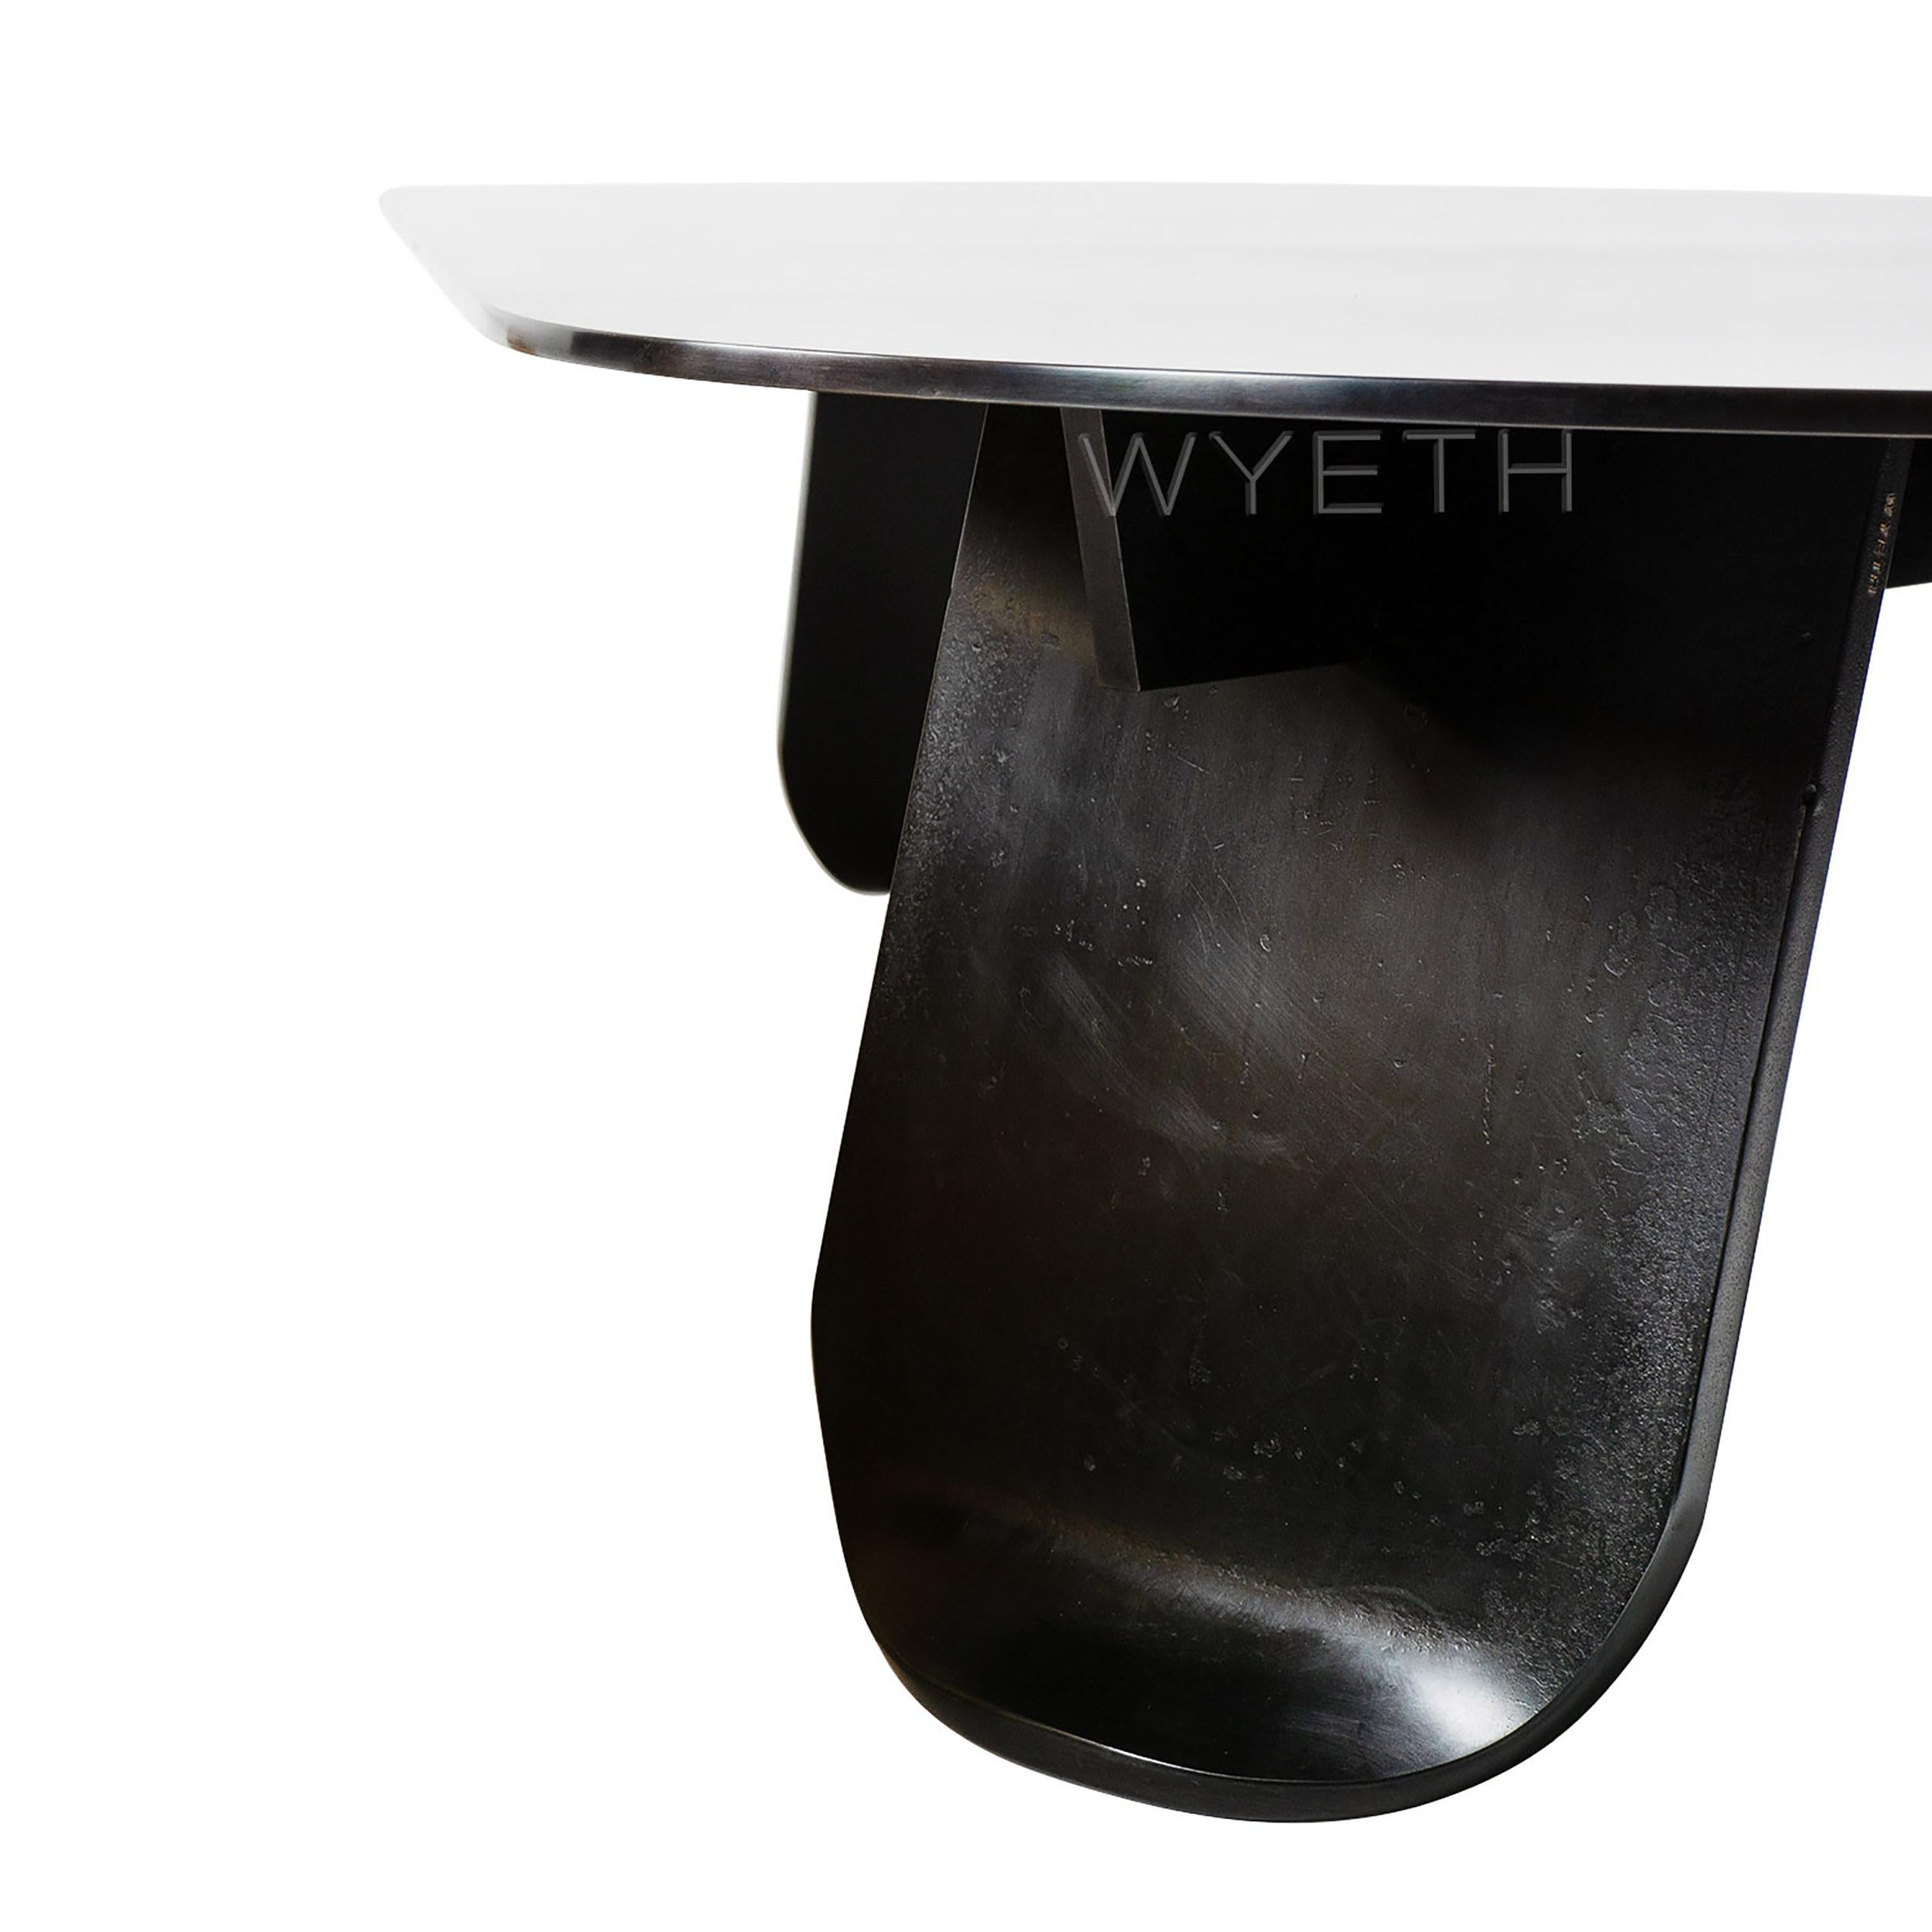 WYETH Chrysalis Table No. 1 in Blackened Steel In New Condition For Sale In Sagaponack, NY